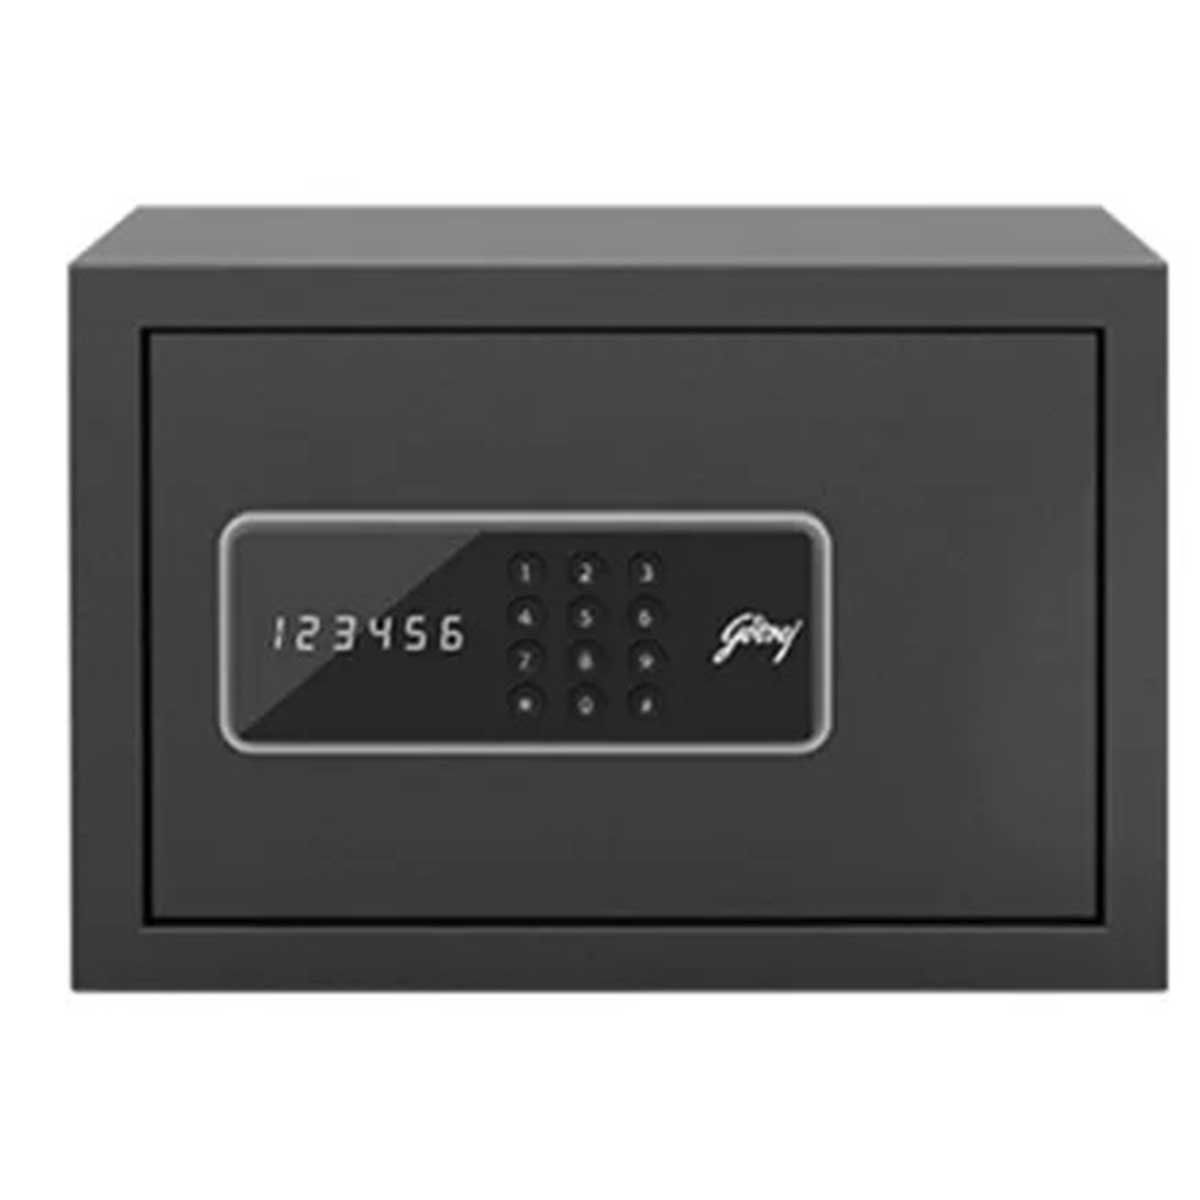 Security Safes Manufacturers, Suppliers in Chawri Bazar